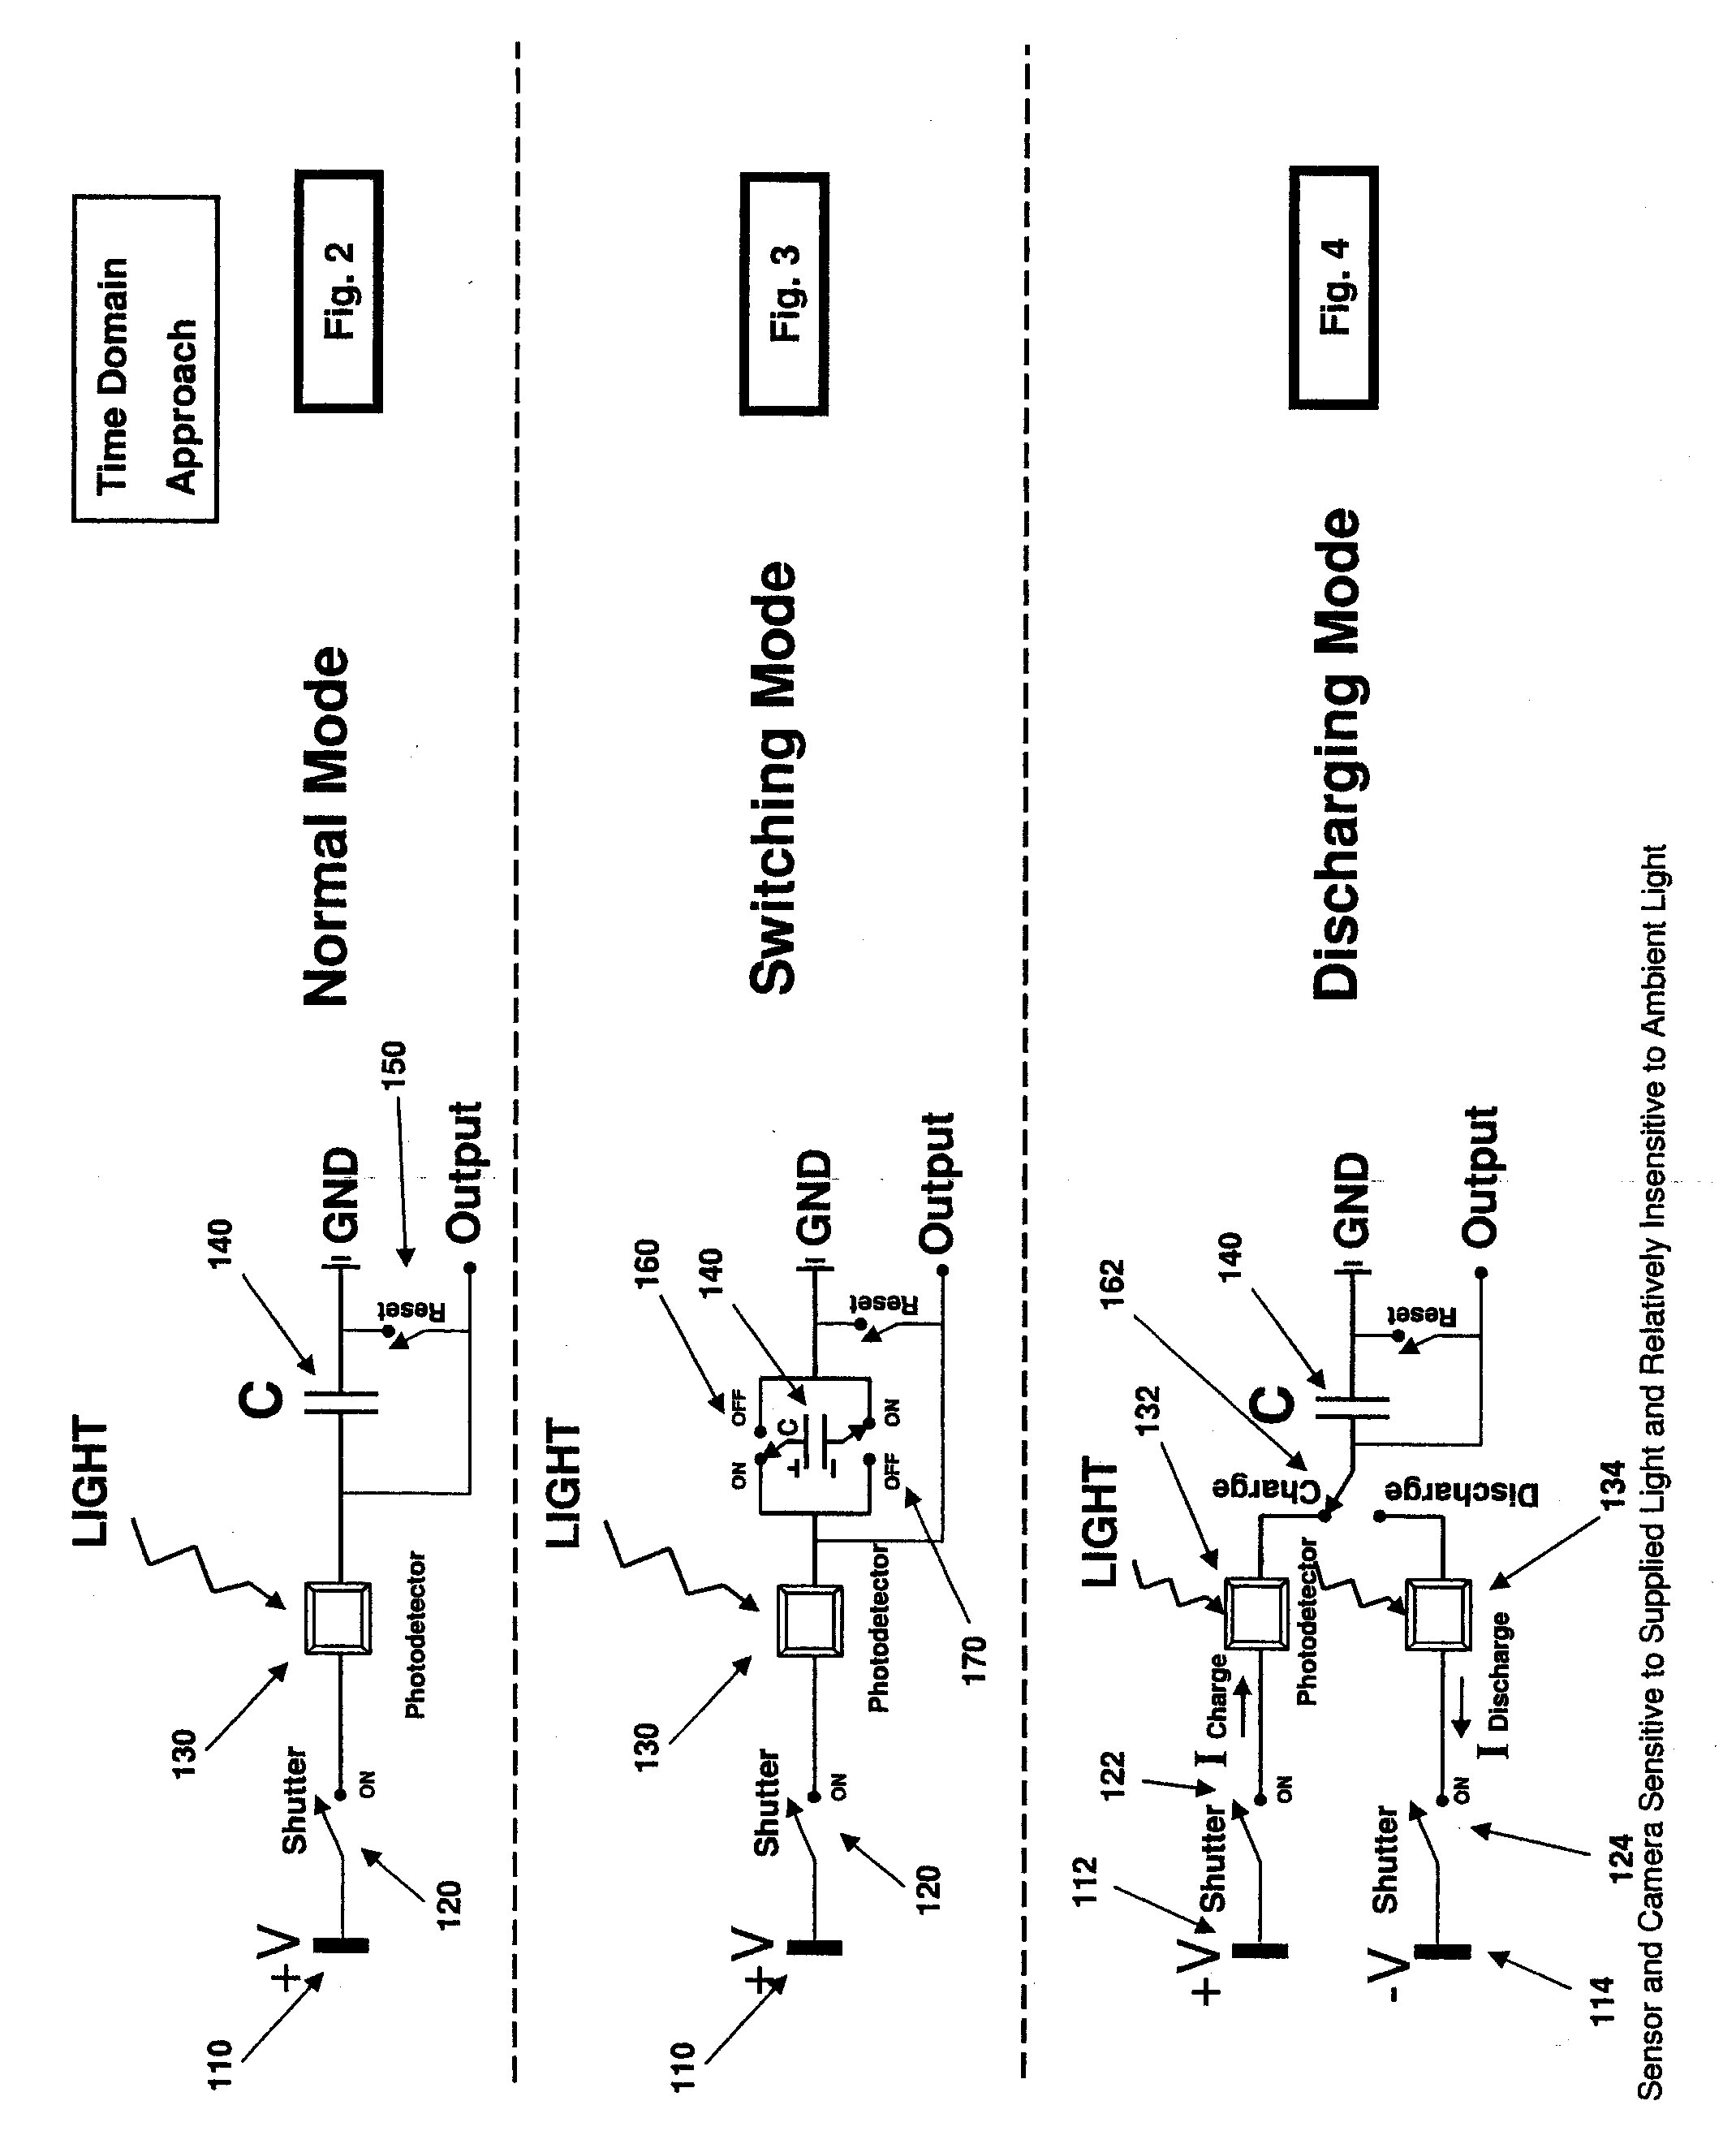 Light Sensitive System and Method for Attenuating the Effect of Ambient Light